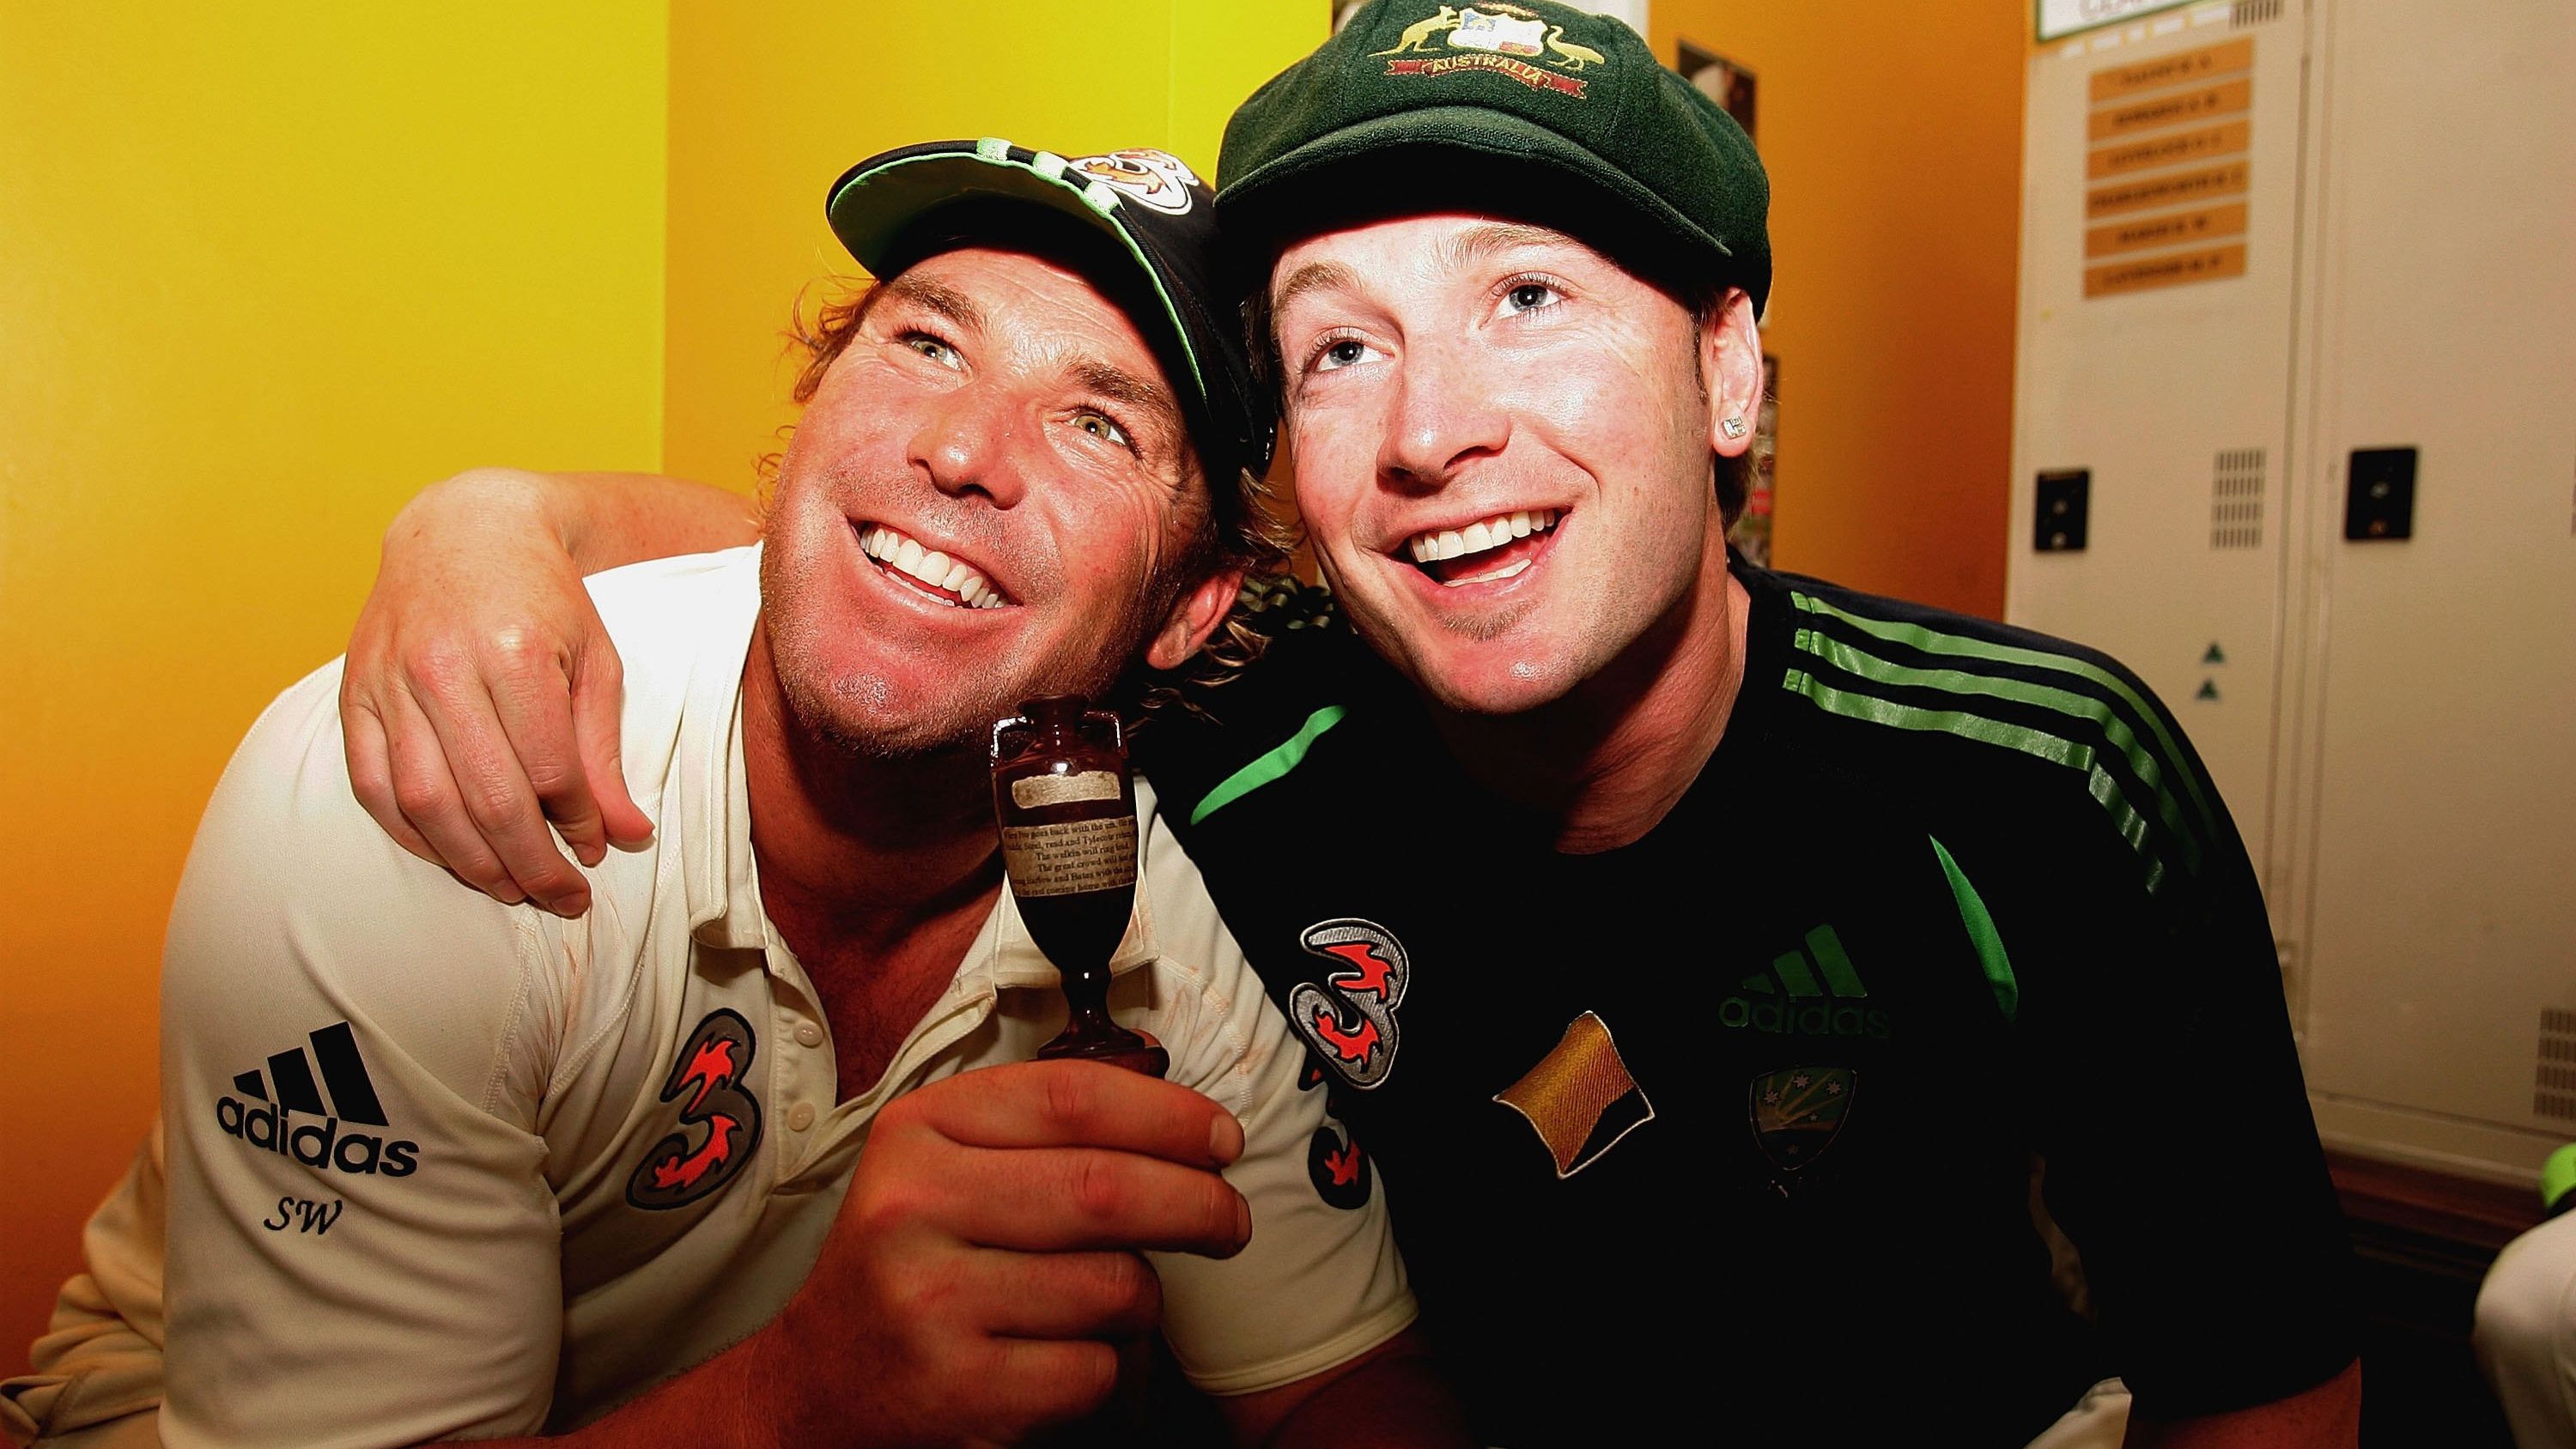 Michael Clarke reveals extent of close friend Shane Warne's 'fast paced' lifestyle